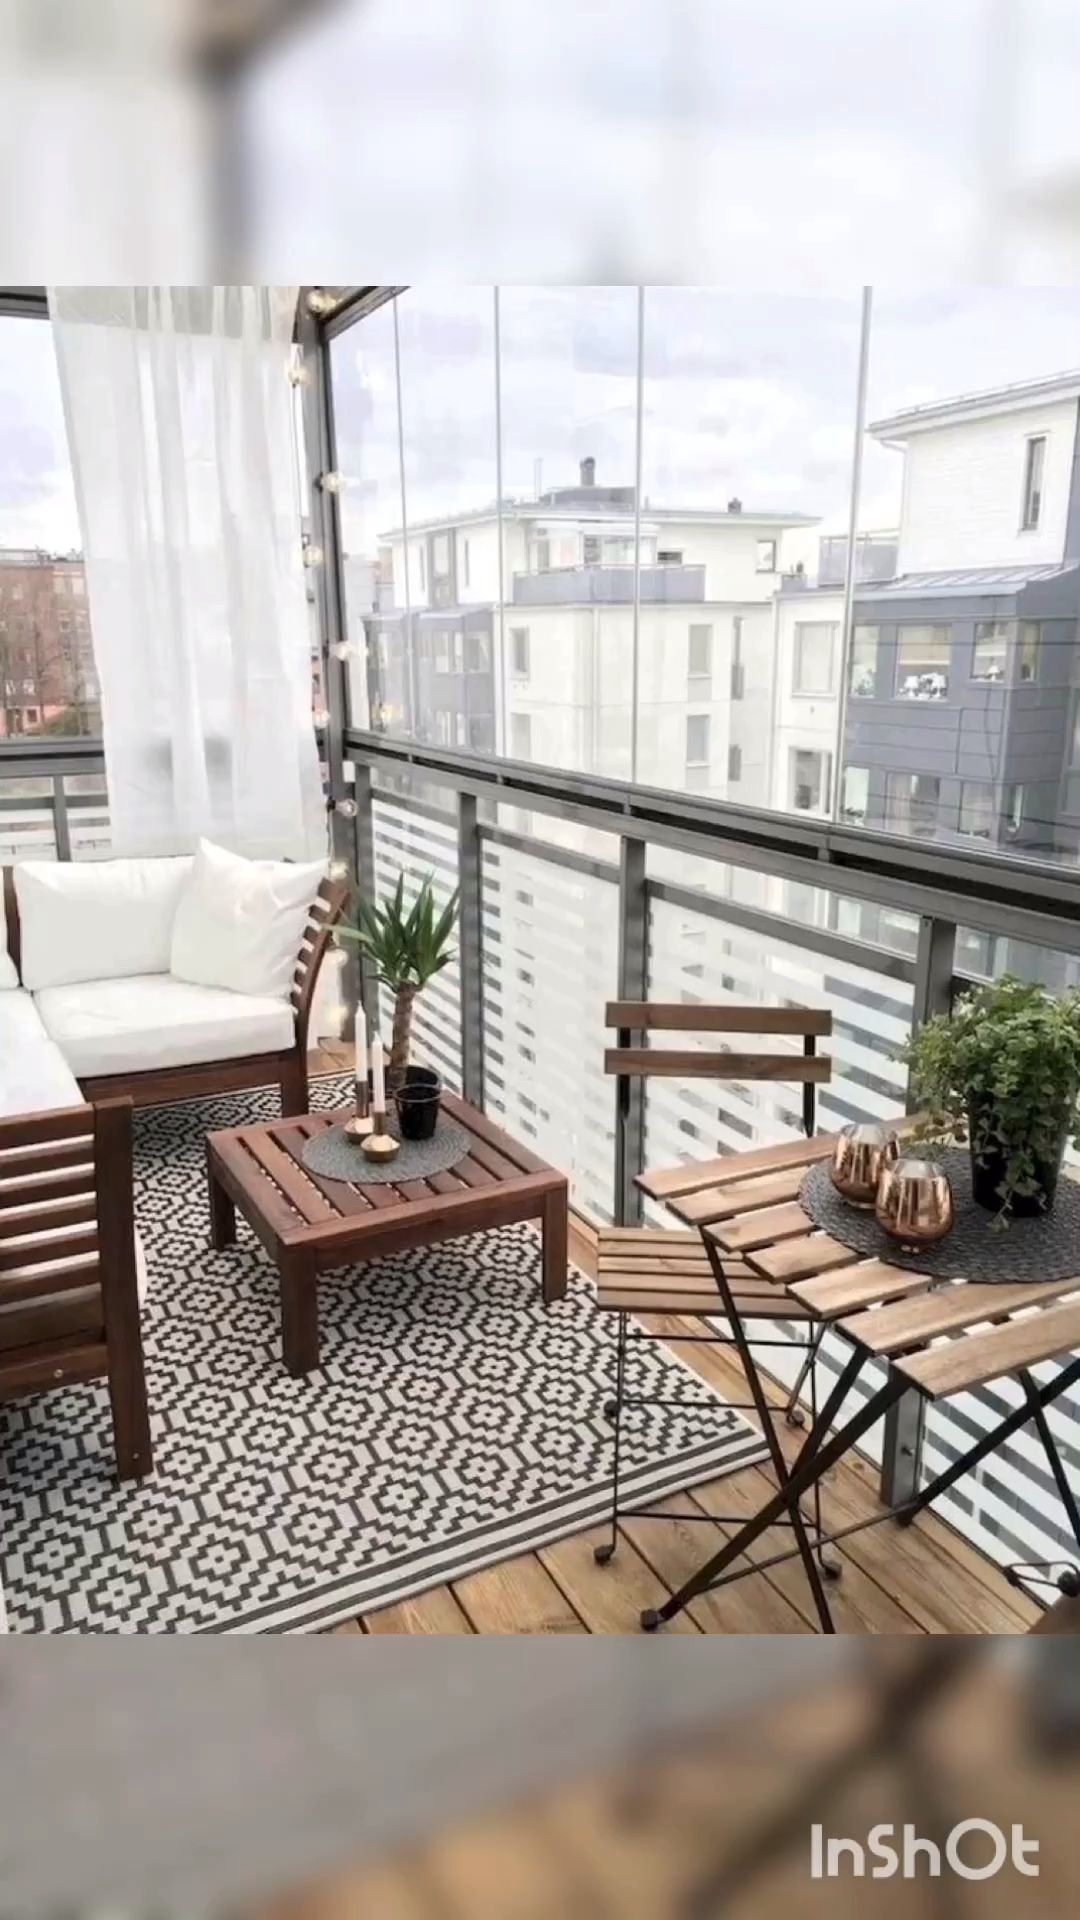 10 ideas for decorating the City Terrace - 10 ideas for decorating the City Terrace -   diy Apartment patio